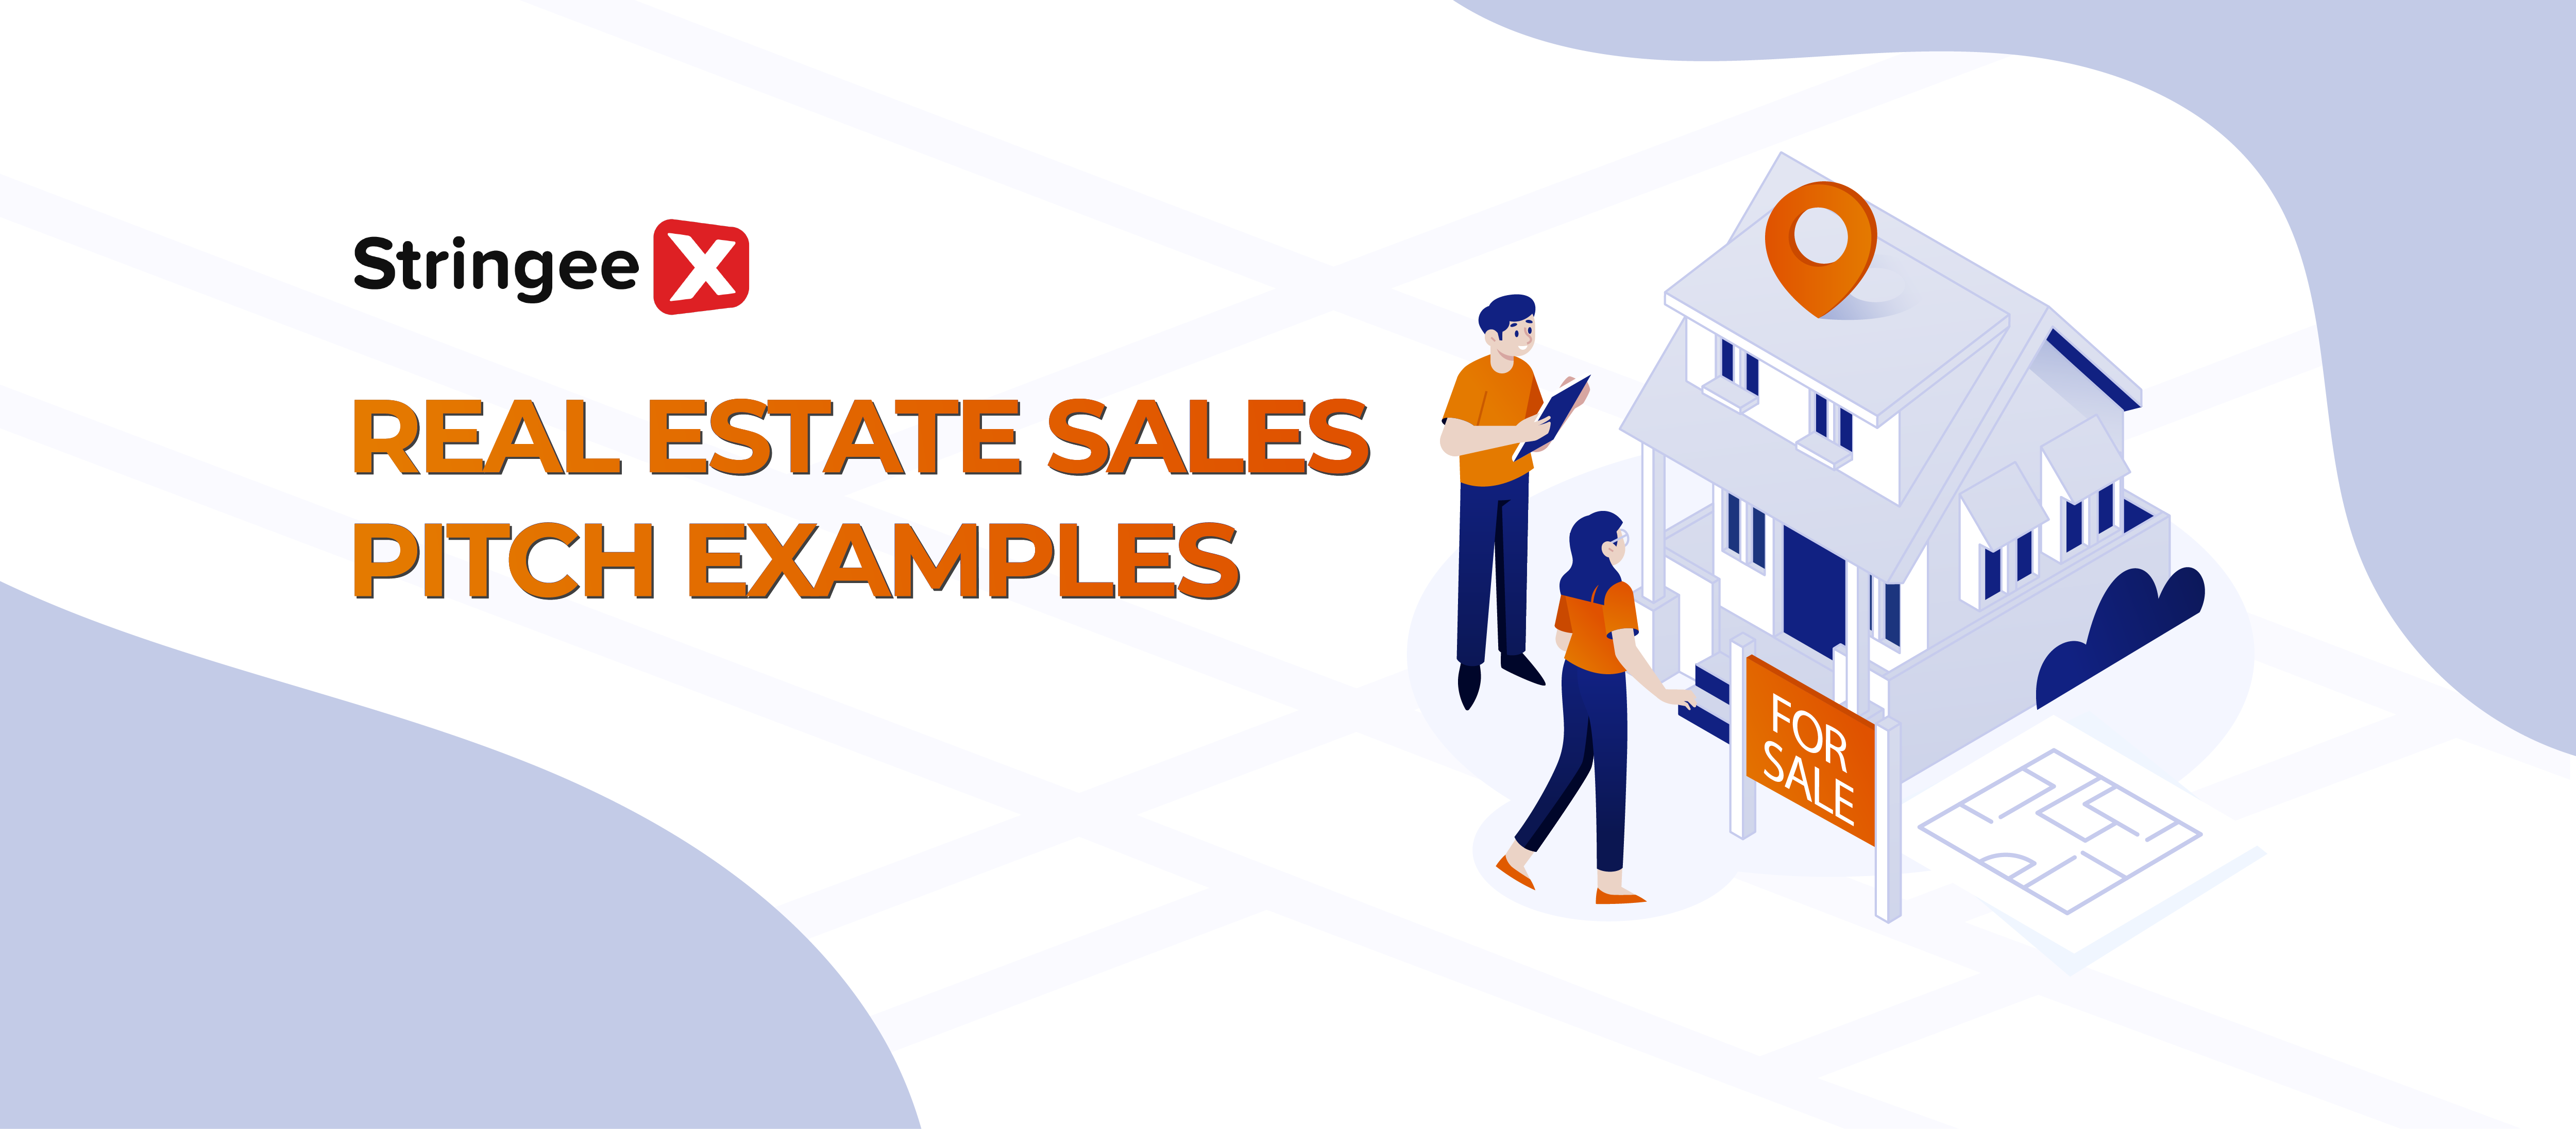 Top 5 Real Estate Sales Pitch Examples